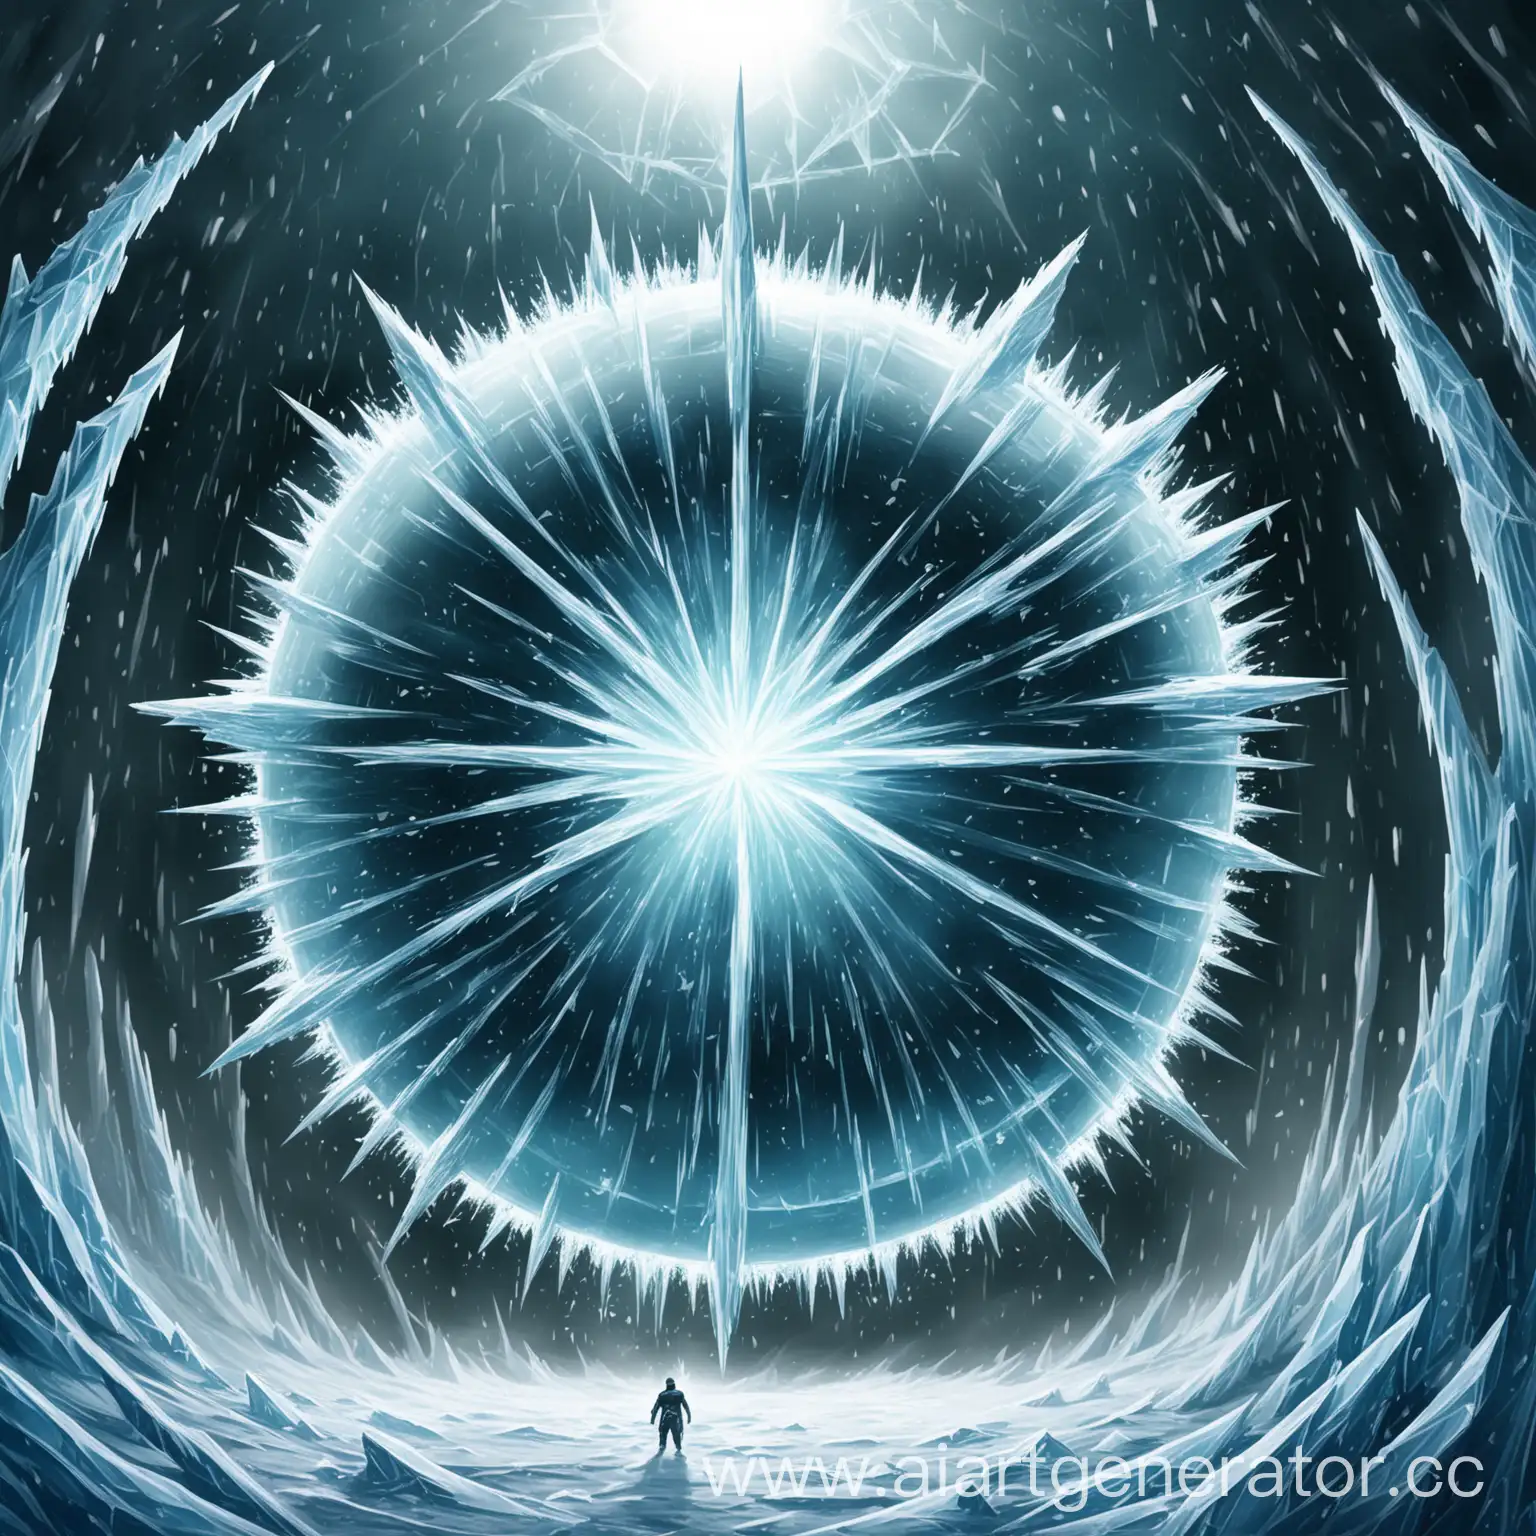 Projected from the cold, infinite void, the Ancient Apparition known as Kaldr is but a faint image of his true self. Nevertheless, his Chilling Touch is enough to reach the furthest of targets. Caught in an Ice Vortex, heroes quickly get Cold Feet and before they know it, find themselves frozen in place. A frigid sphere flies across the sky, expanding at its destination. Within seconds, an Ice Blast strikes the marked area. Flash frozen, enemies have no choice but to retreat before their brittle bodies shatter to pieces...